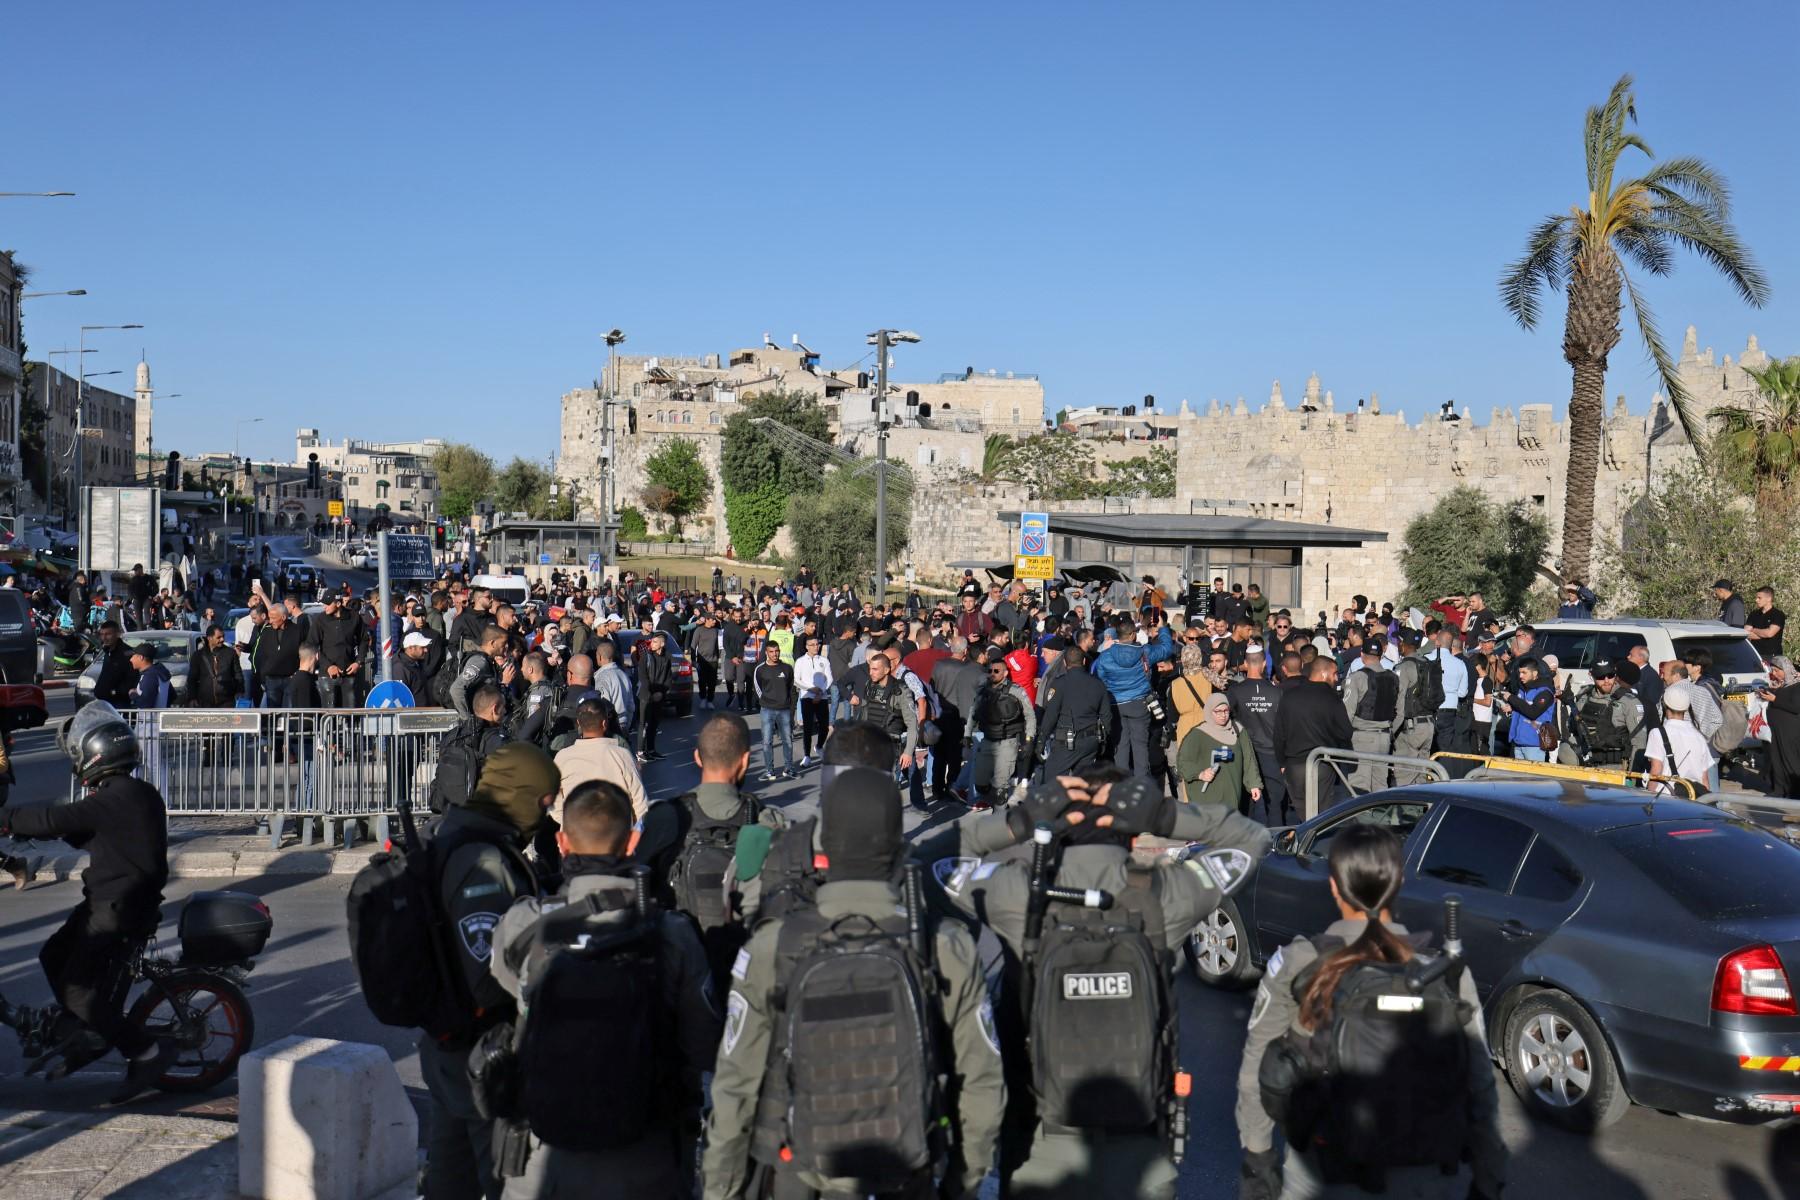 Israeli security forces keep Palestinians at bay in front of the Damascus Gate in Jerusalem's Old City, as they gather to watch Israeli protesters marching with national flags toward Tzahal square on April 20. Photo: AFP